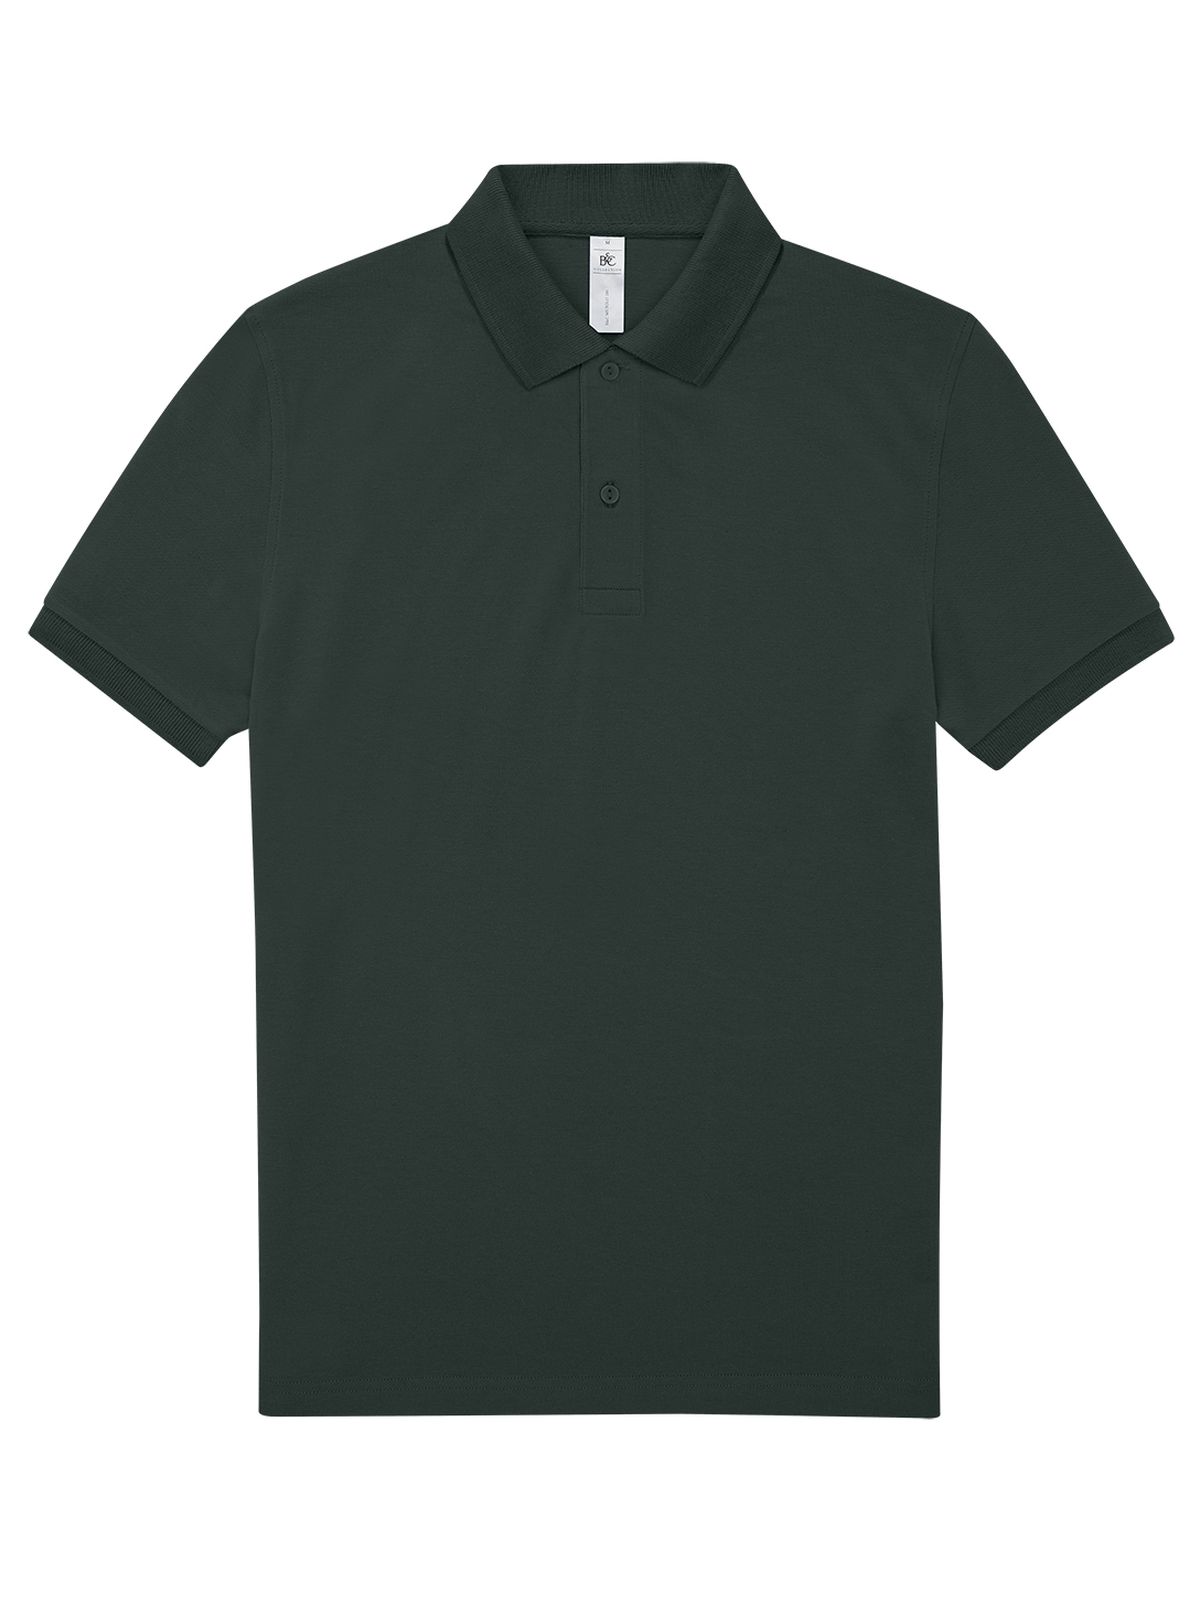 bc-my-polo-180-dark-forest.webp